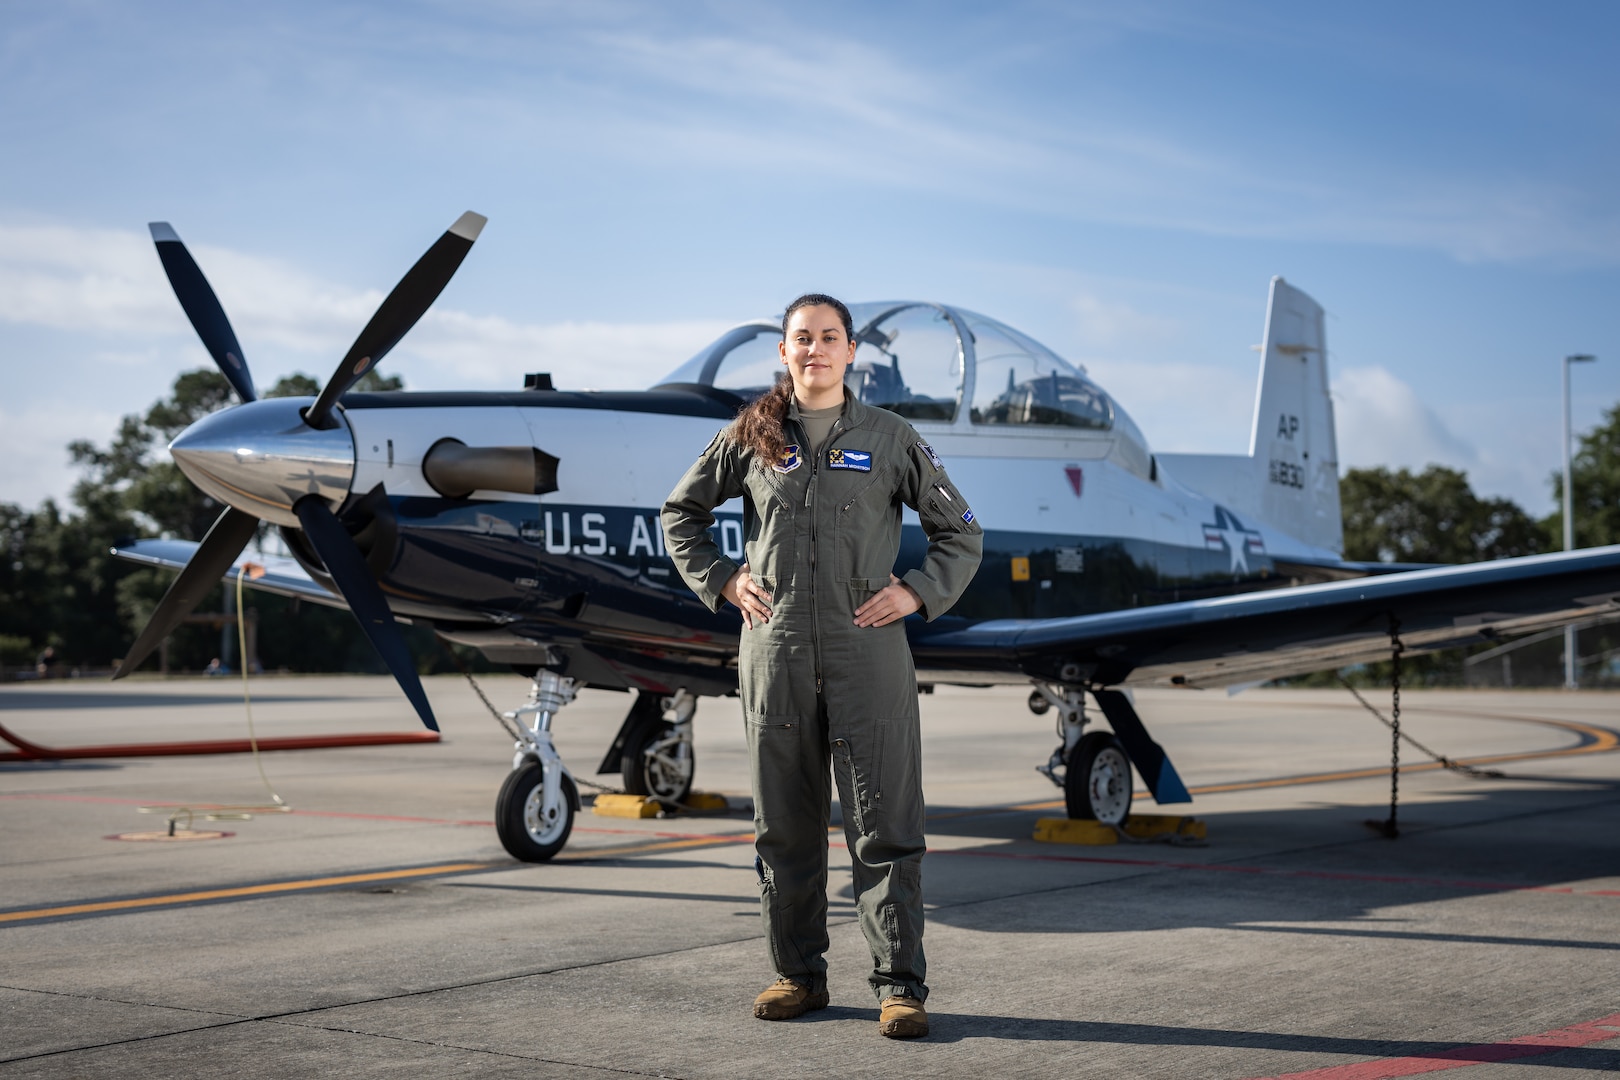 1st Lt. Hannah Michitsch is pictured with a T-6 Texan II at Naval Air Station Pensacola